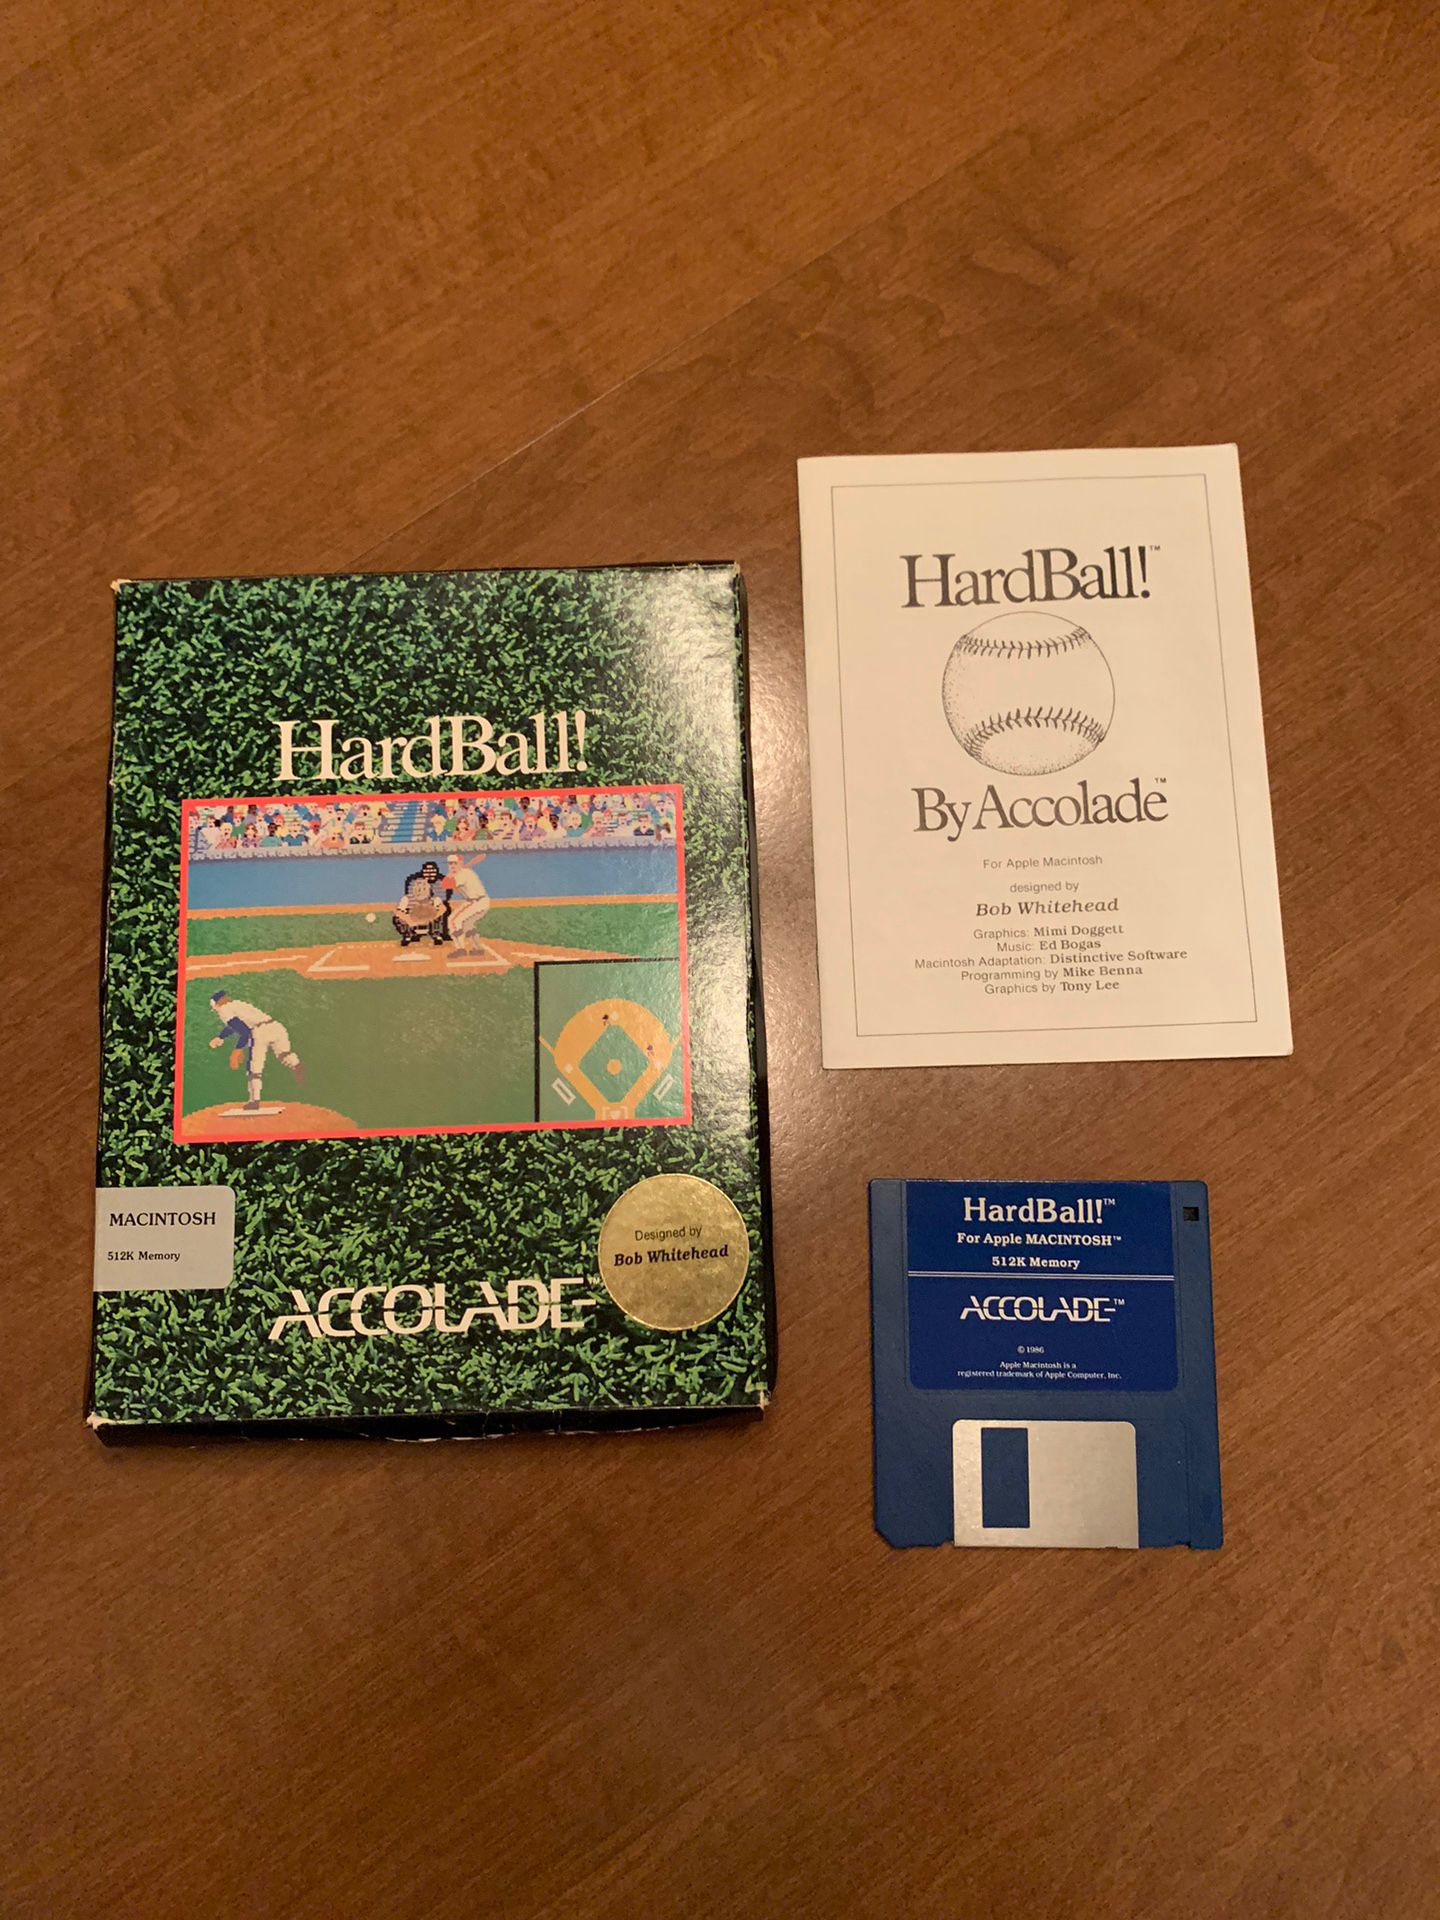 HARDBALL Baseball Computer Video Game By Accolade For Macintosh from 1986